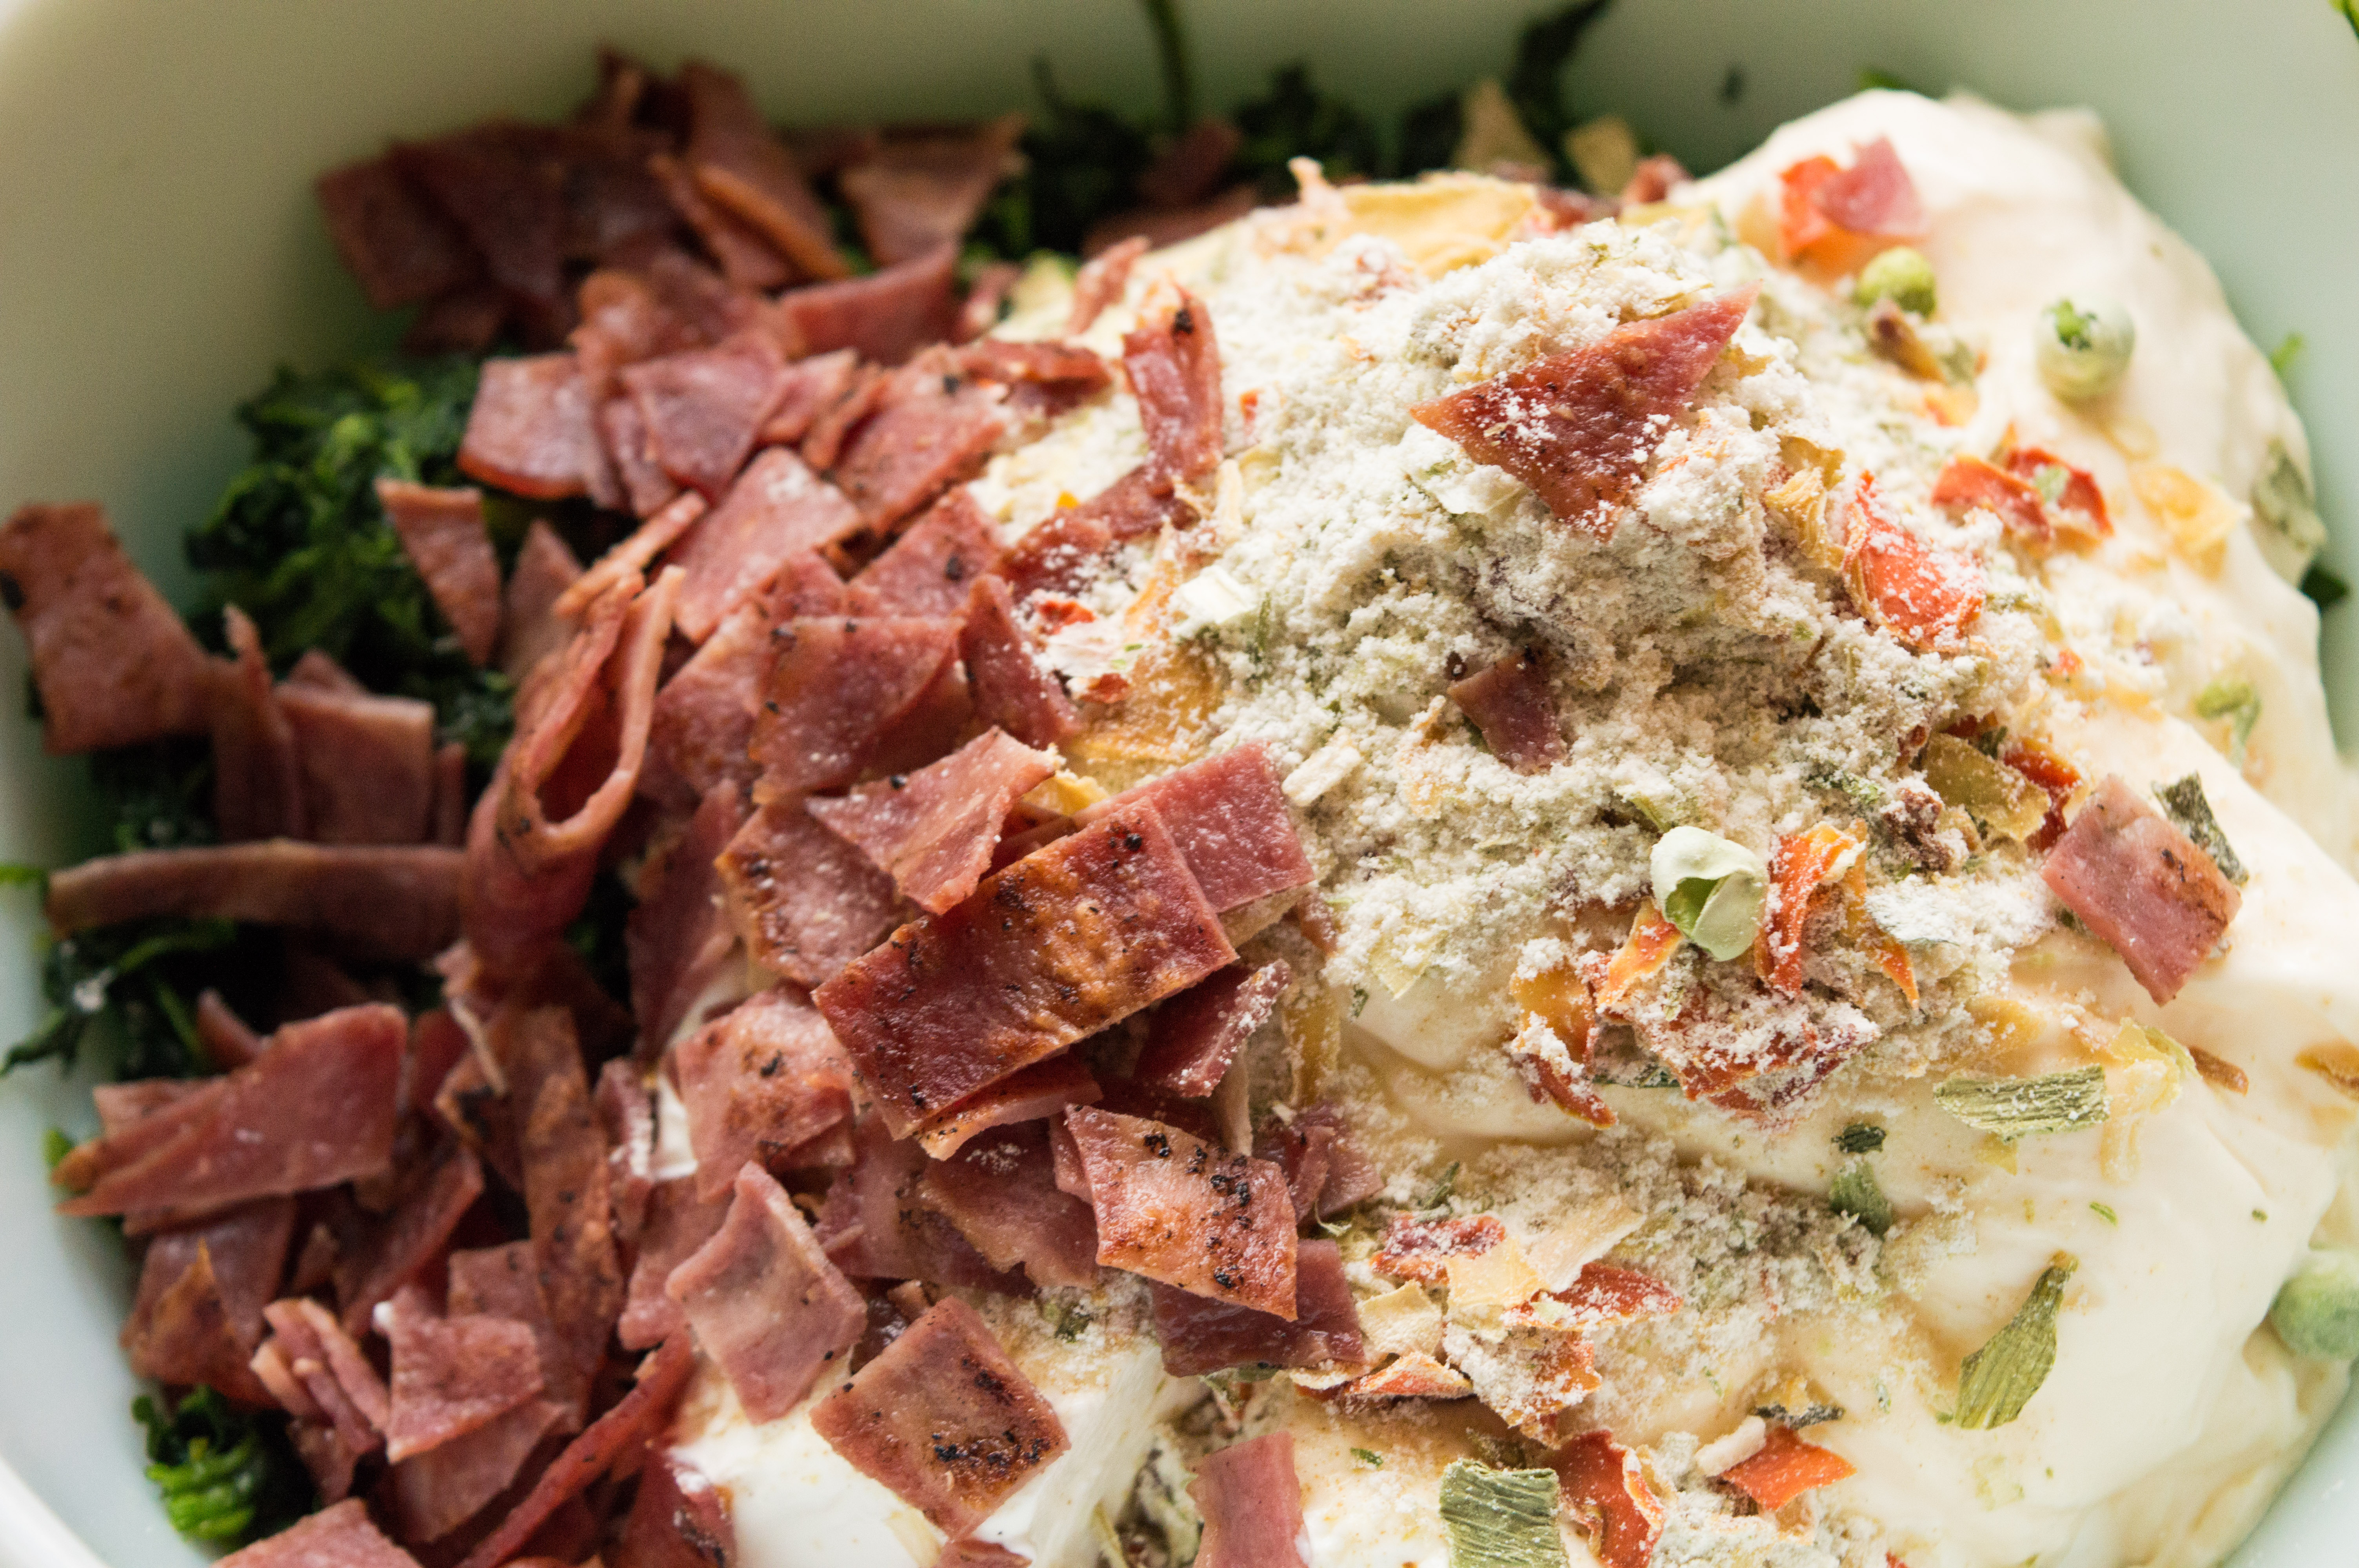 Love spinach dip? So do I. This spinach dip recipe, an easy pot luck recipe, will leave you craving more once you add my special ingredient. Bacon! 